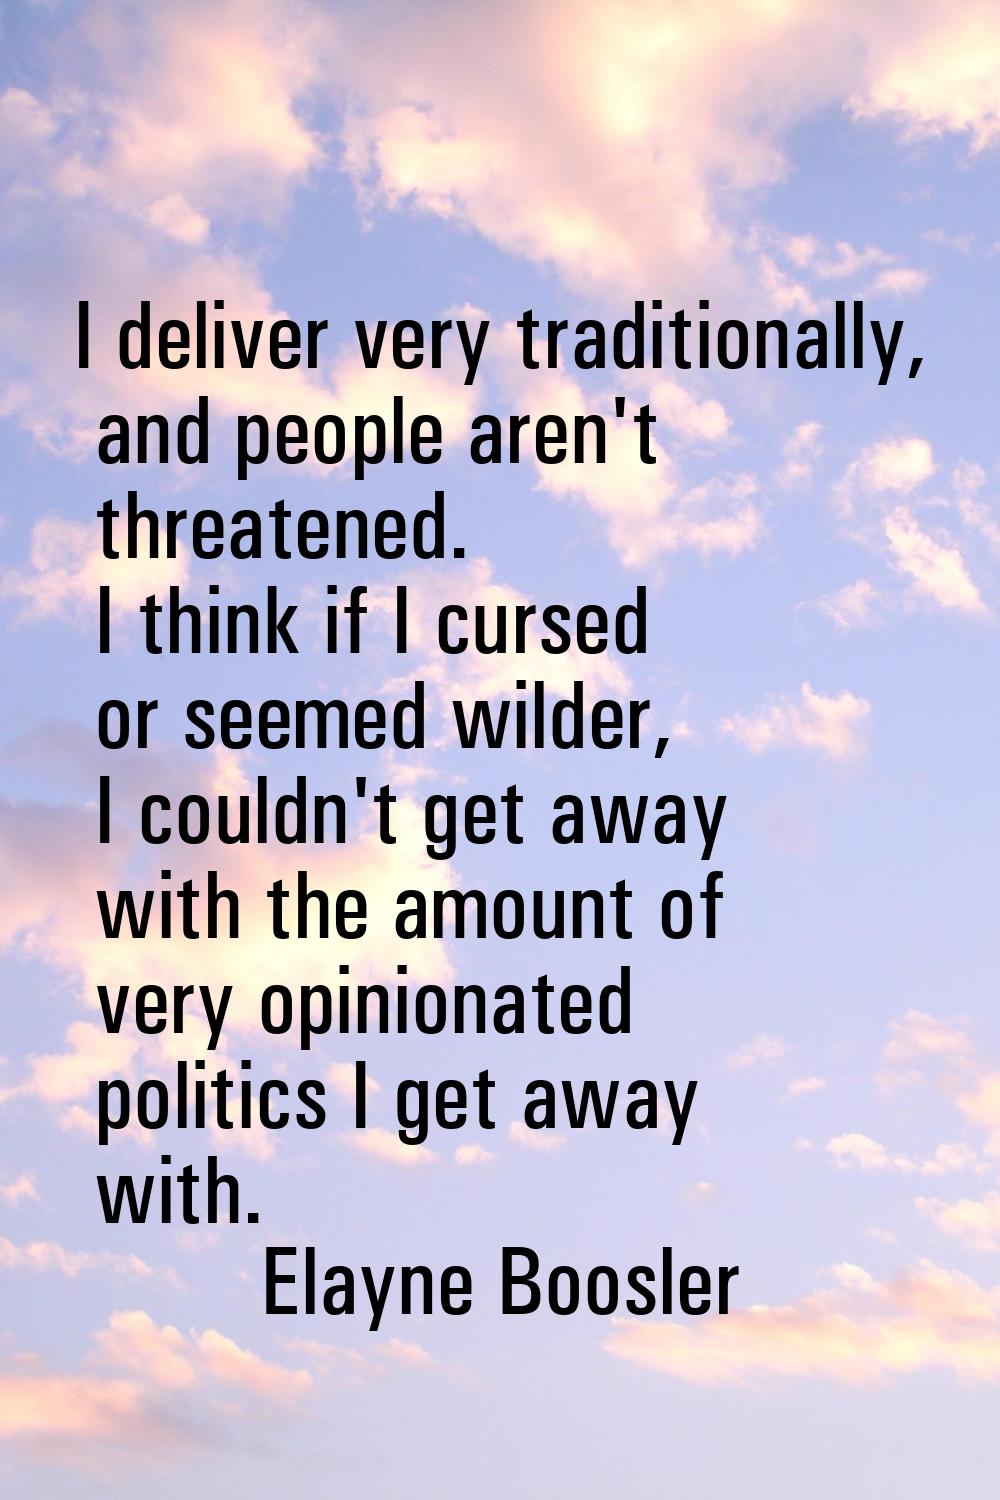 I deliver very traditionally, and people aren't threatened. I think if I cursed or seemed wilder, I